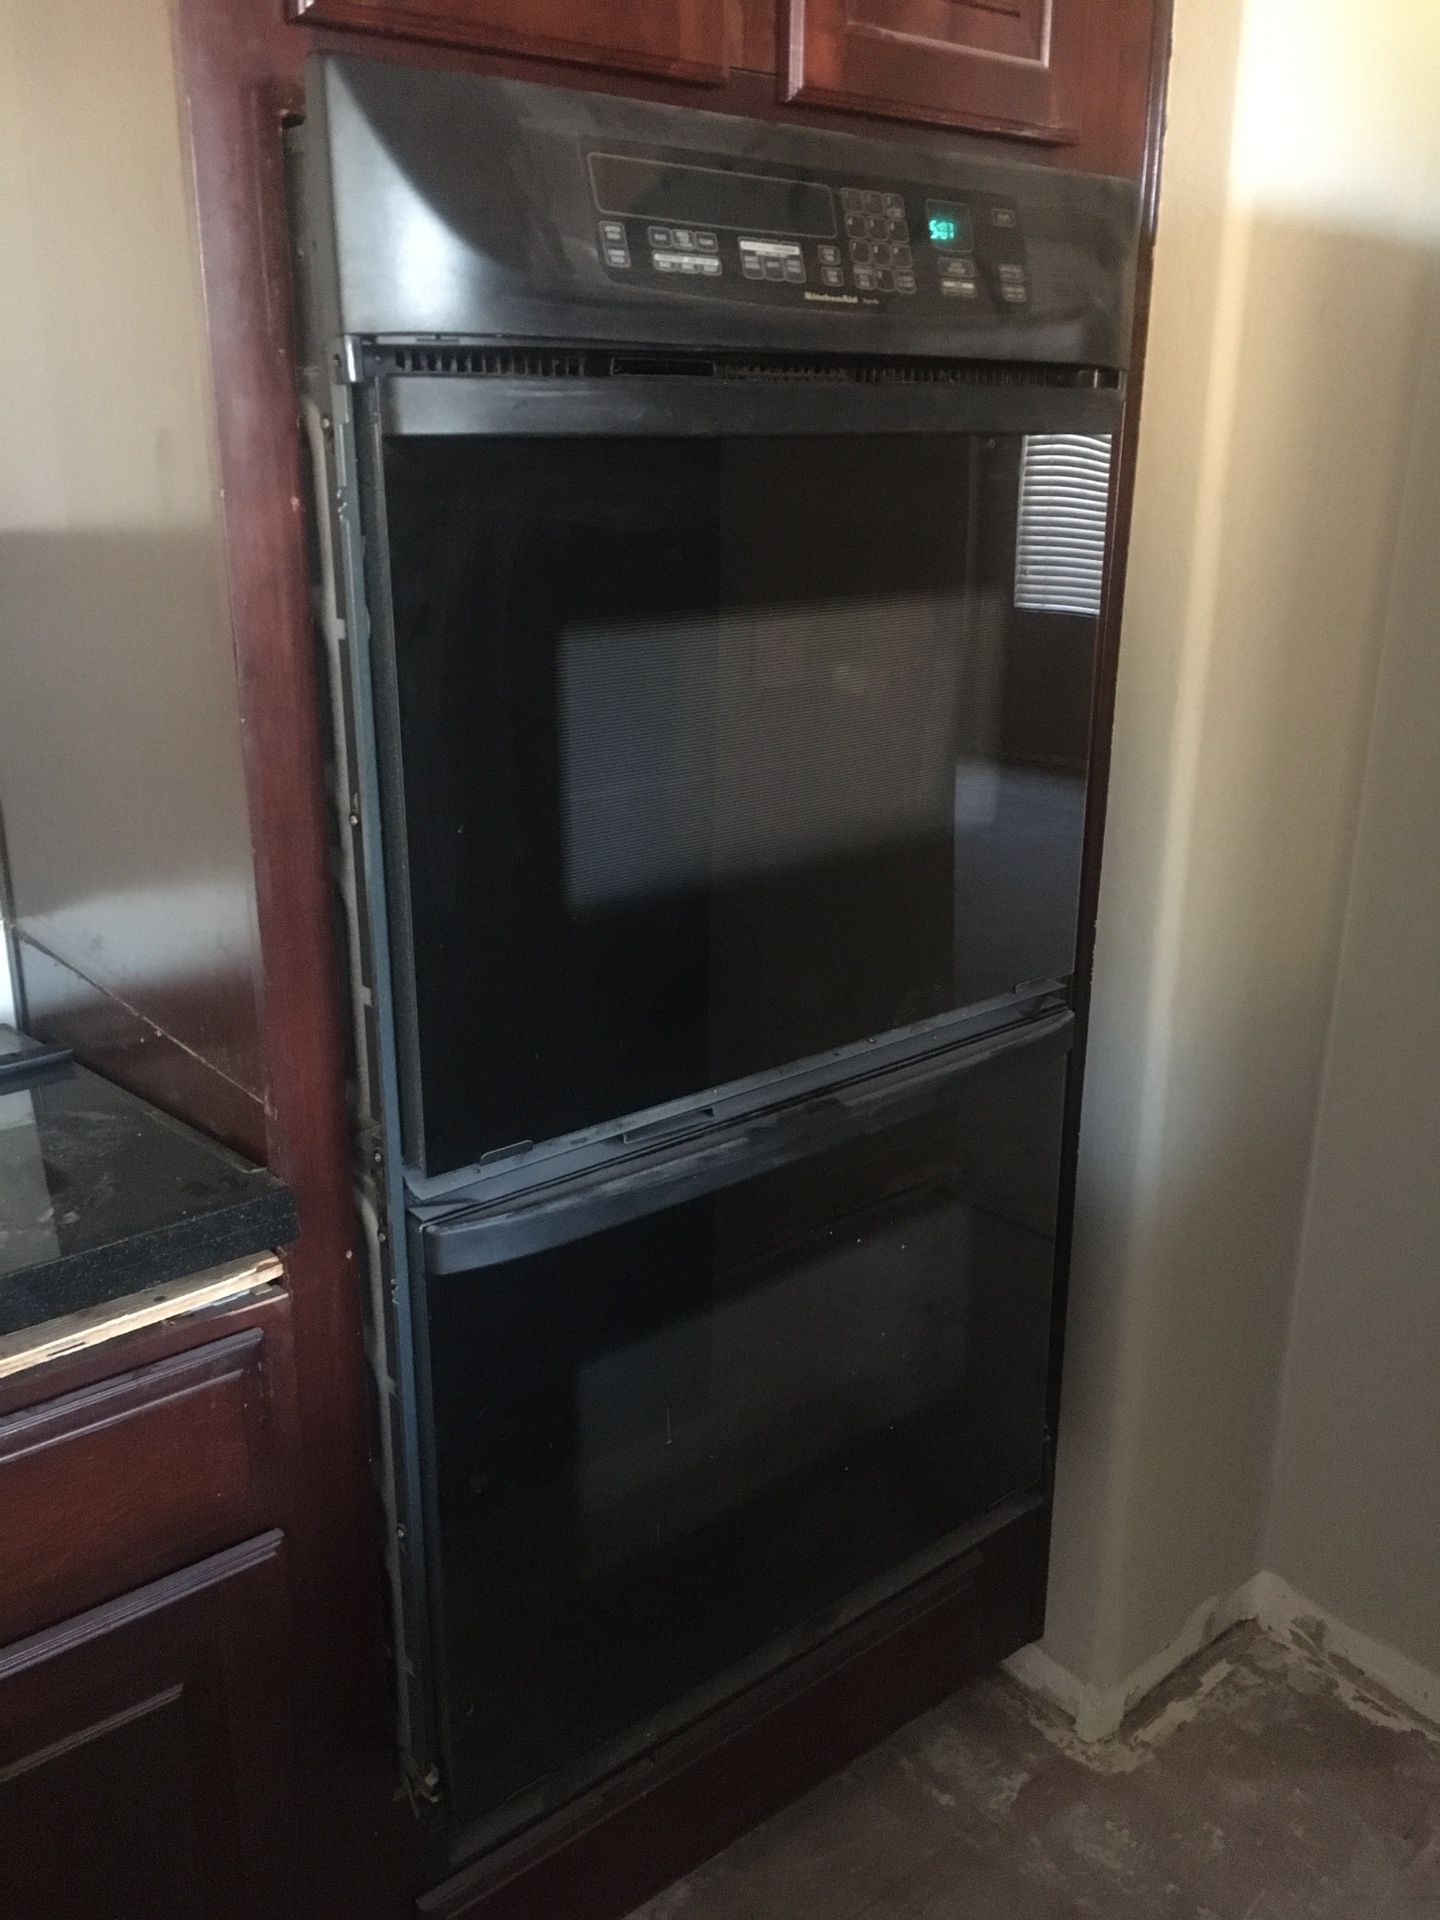 Kitchenaid Electric double oven in good working condition